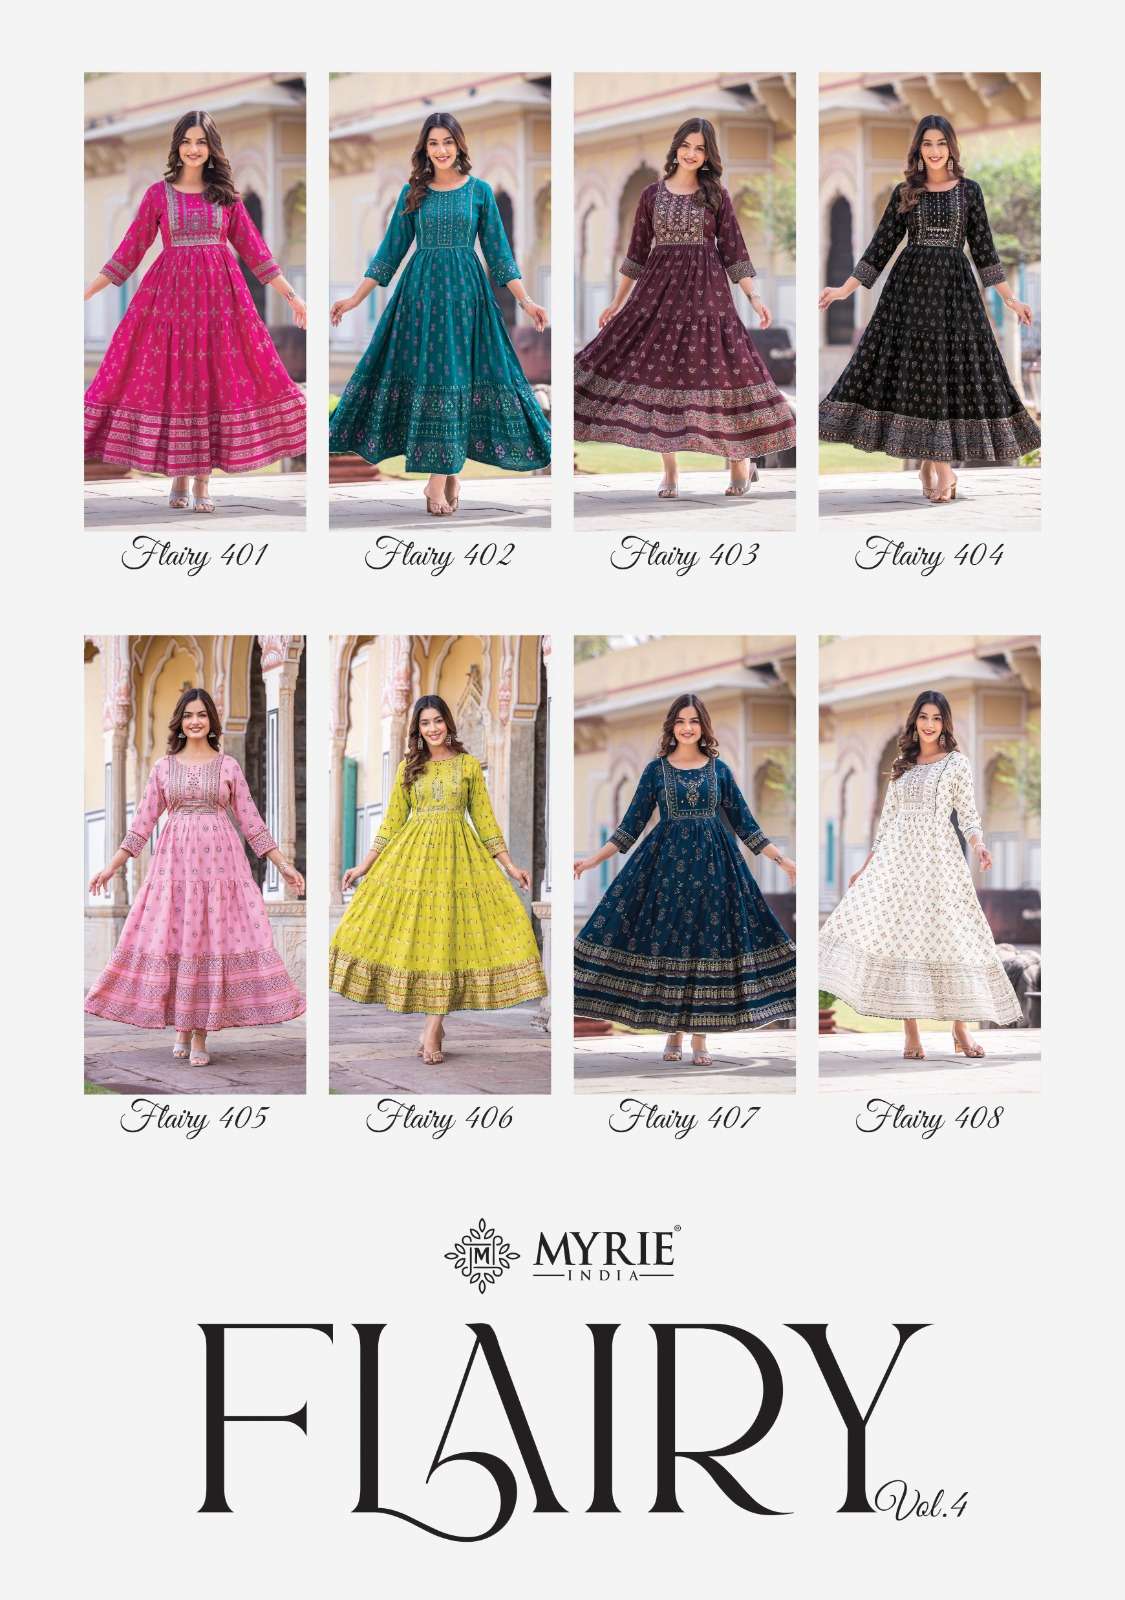 Flairy Vol 4 Buy Mayrie India Online Wholesaler Latest Collection Flar Kurtis